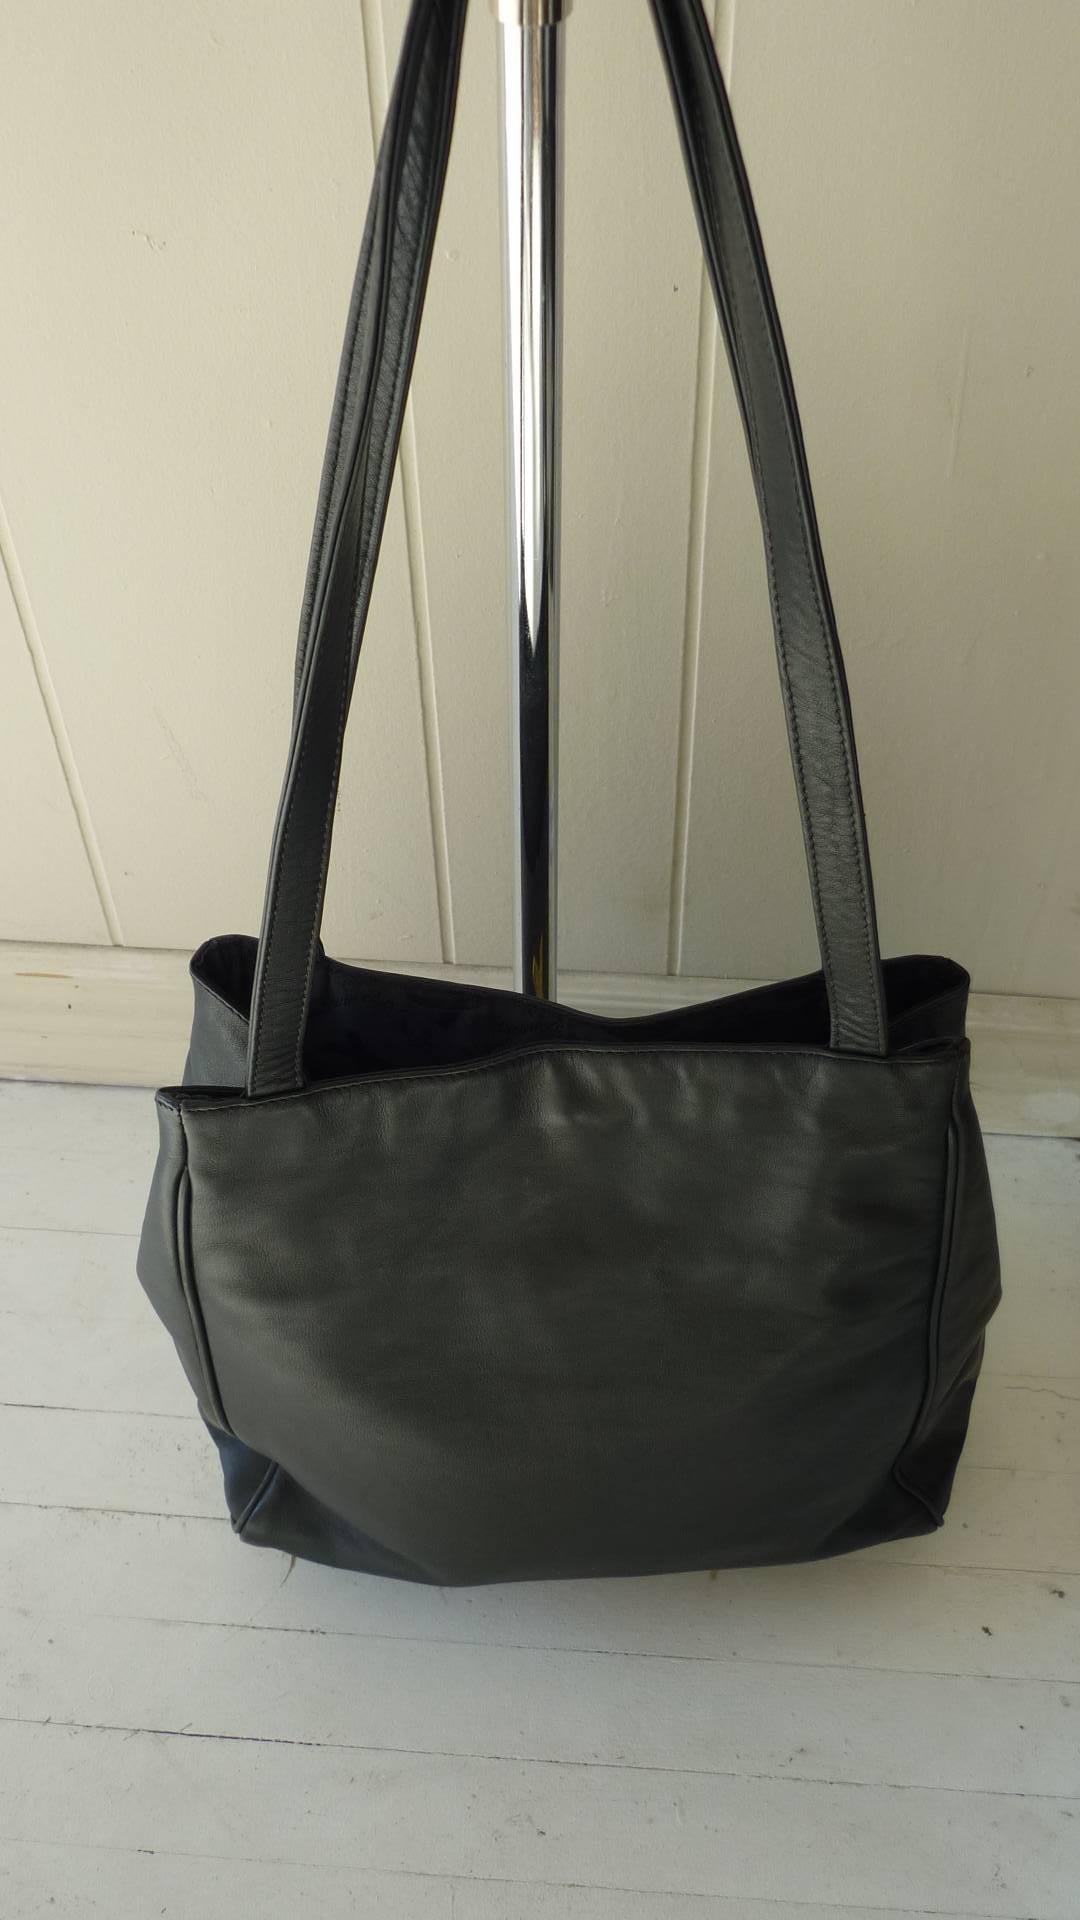 Women's Paloma Picasso Black Leather Shoulder Tote Bag